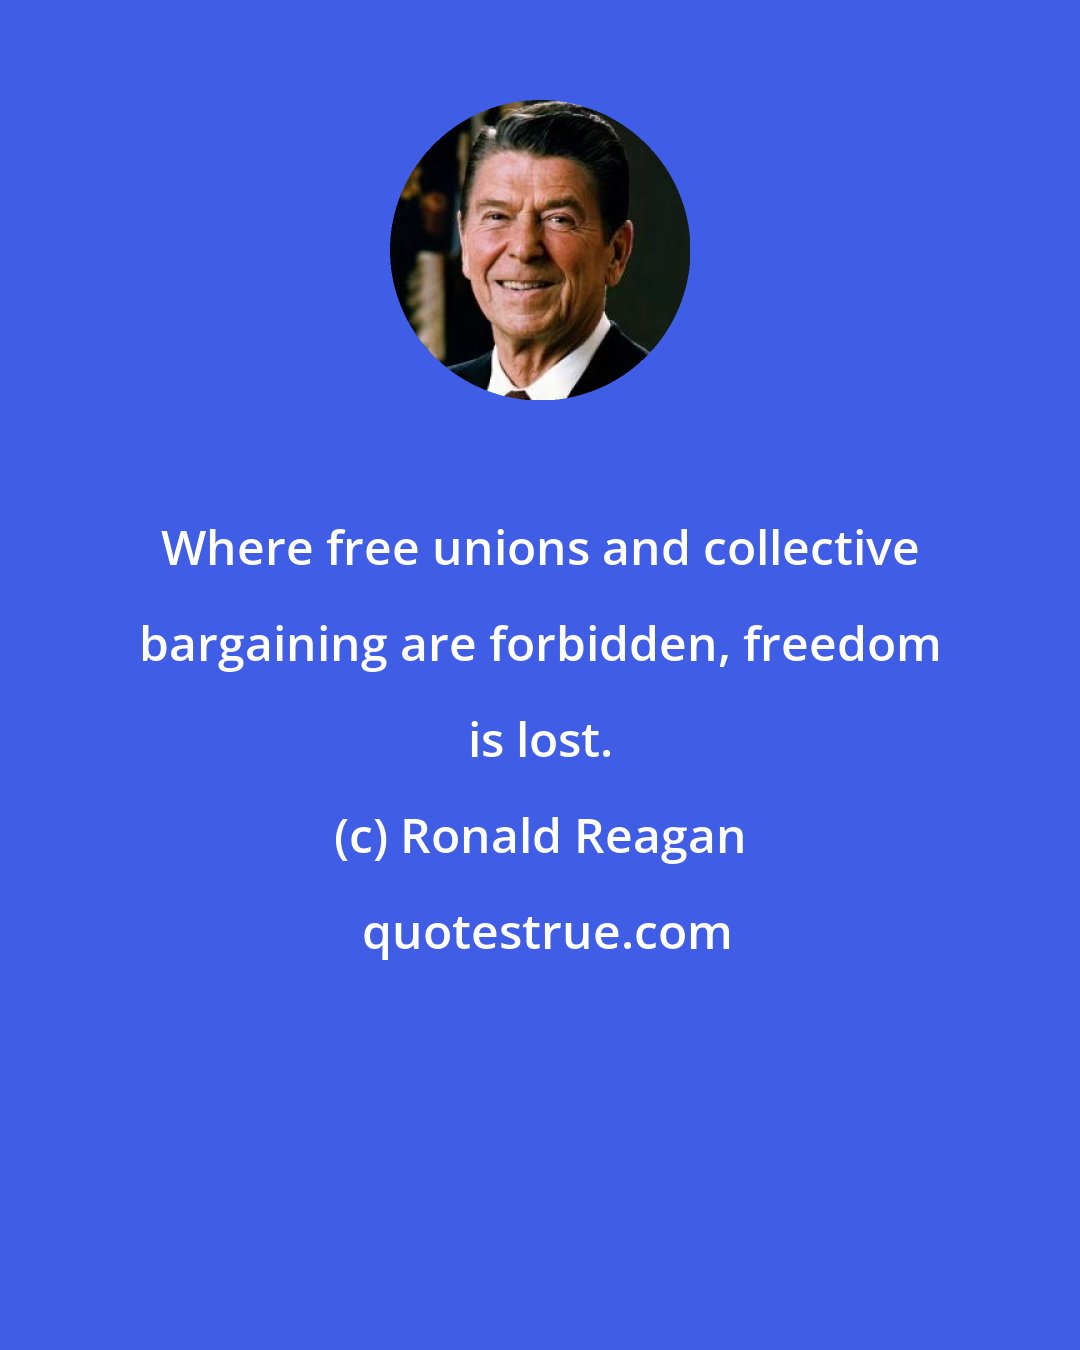 Ronald Reagan: Where free unions and collective bargaining are forbidden, freedom is lost.